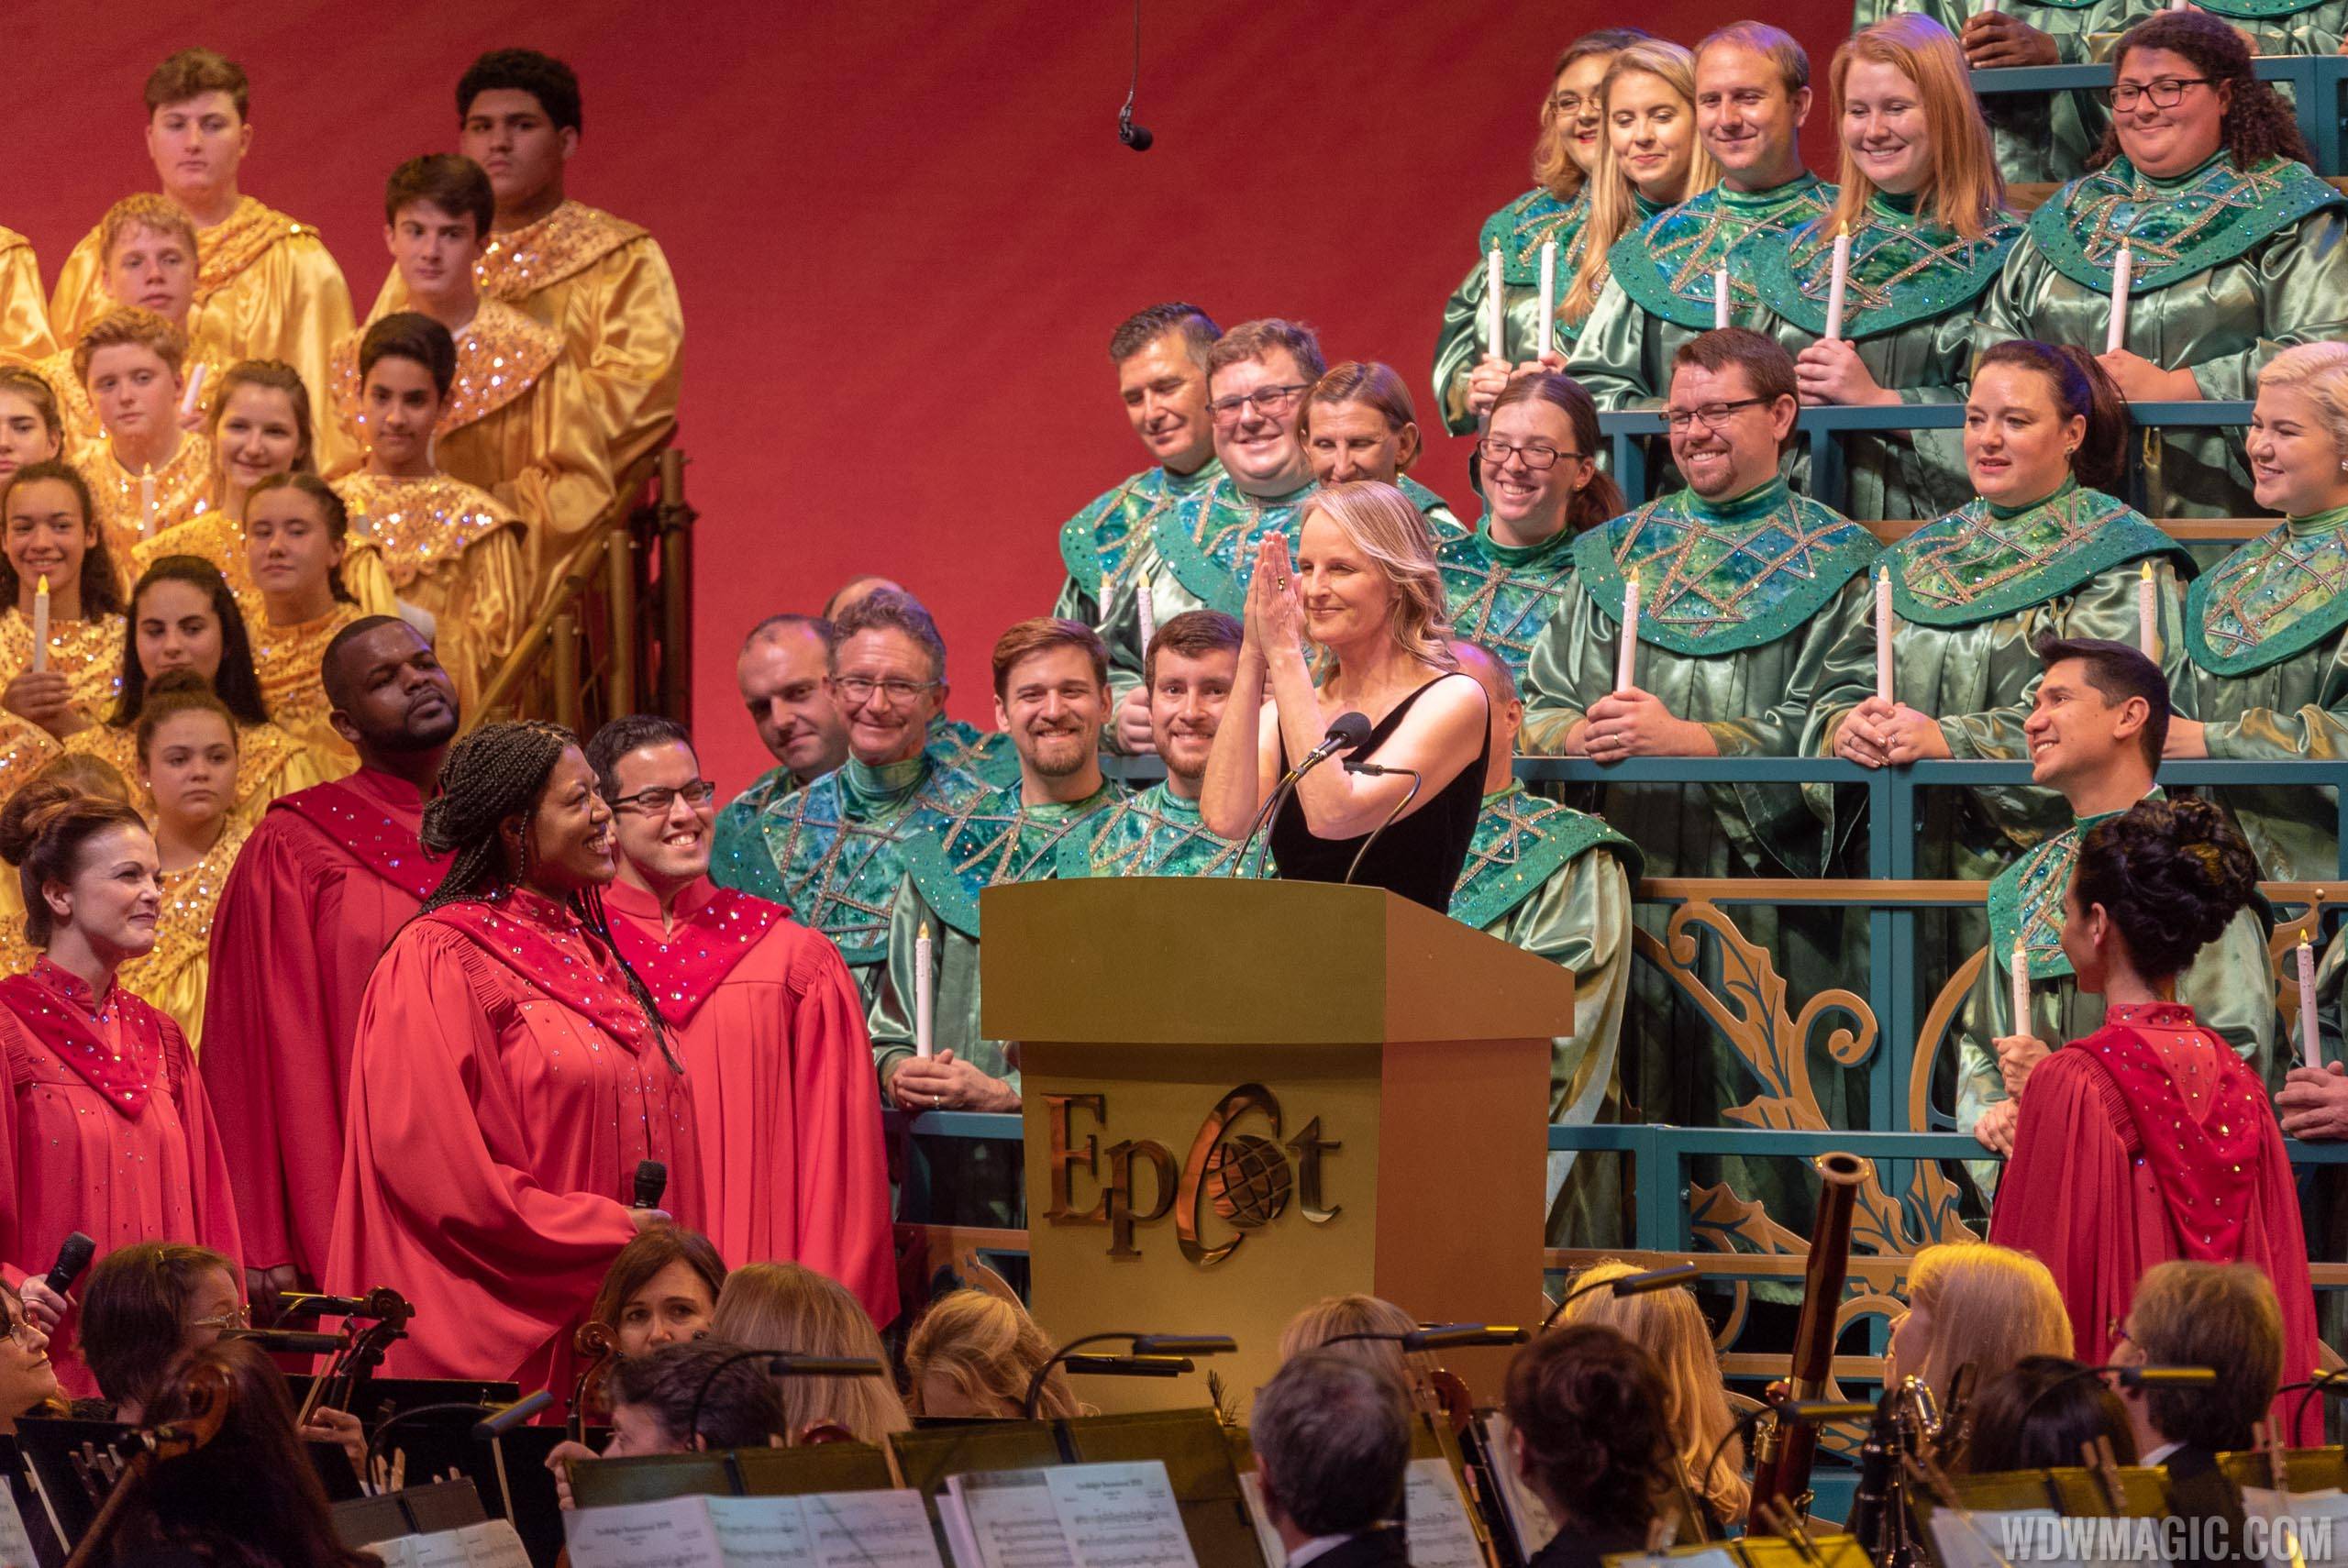 PHOTOS - Helen Hunt at Epcot's Candlelight Processional